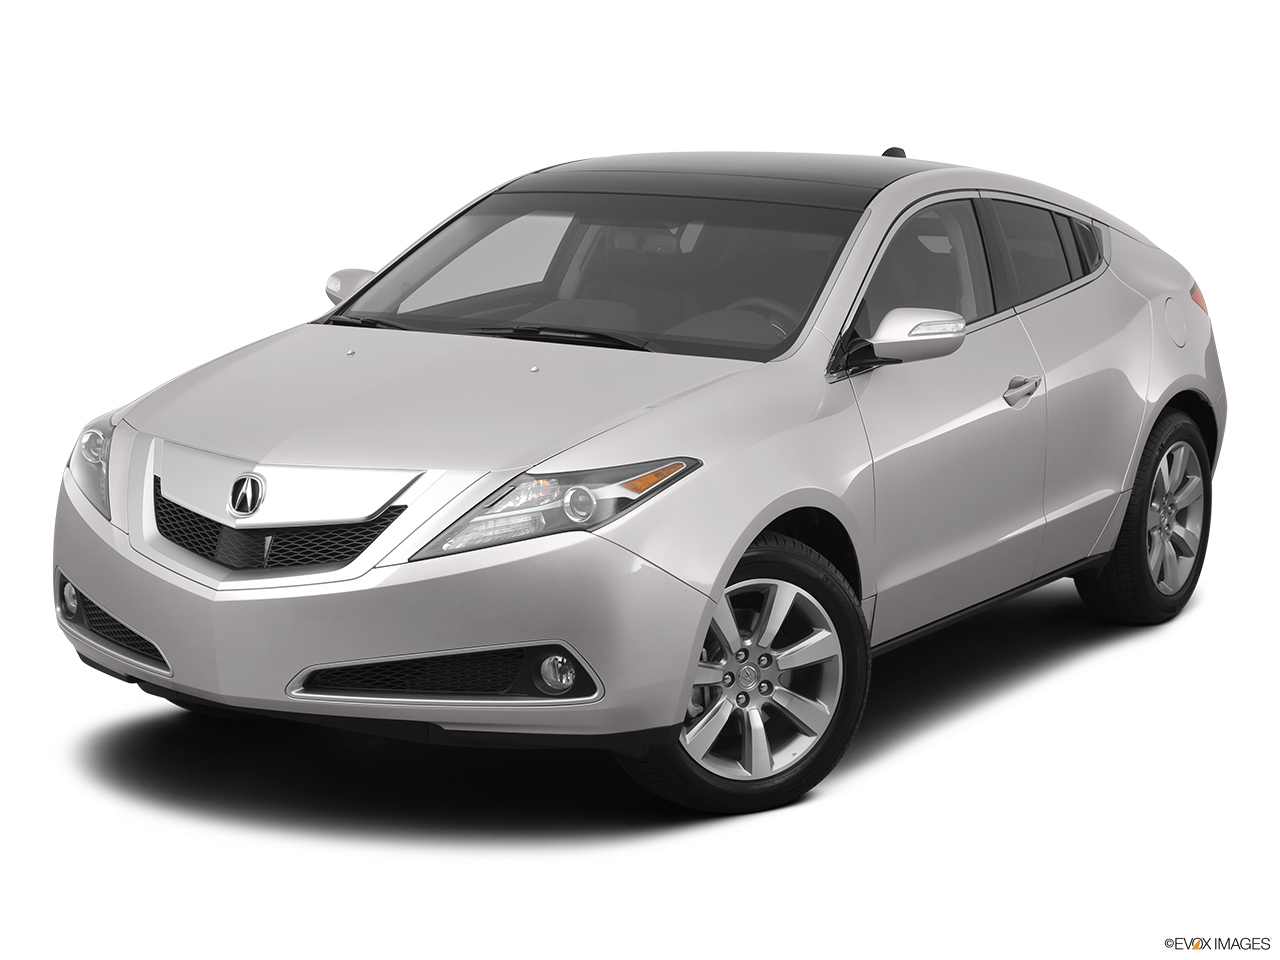 2012 Acura ZDX ZDX Advance Front angle view. 